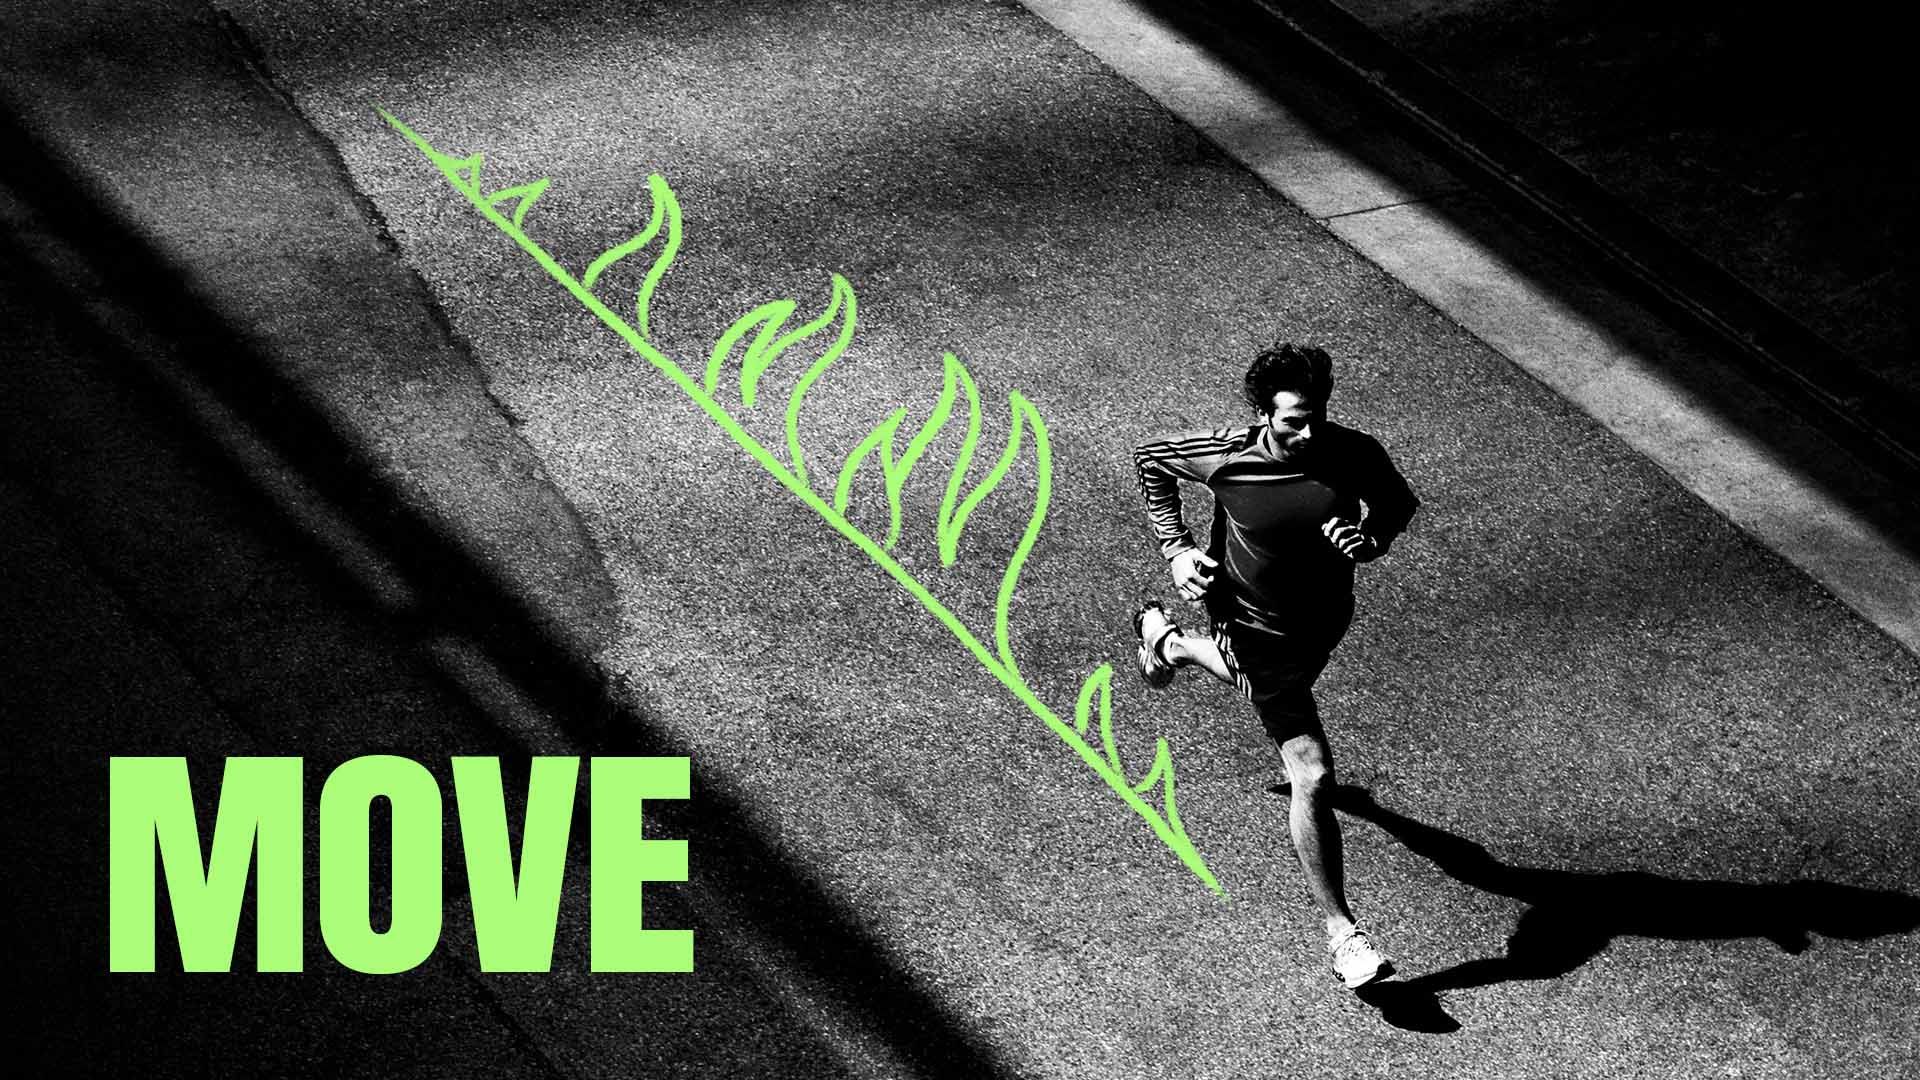 A black and white photo of a man jogging. The word "MOVE" is superimposed.